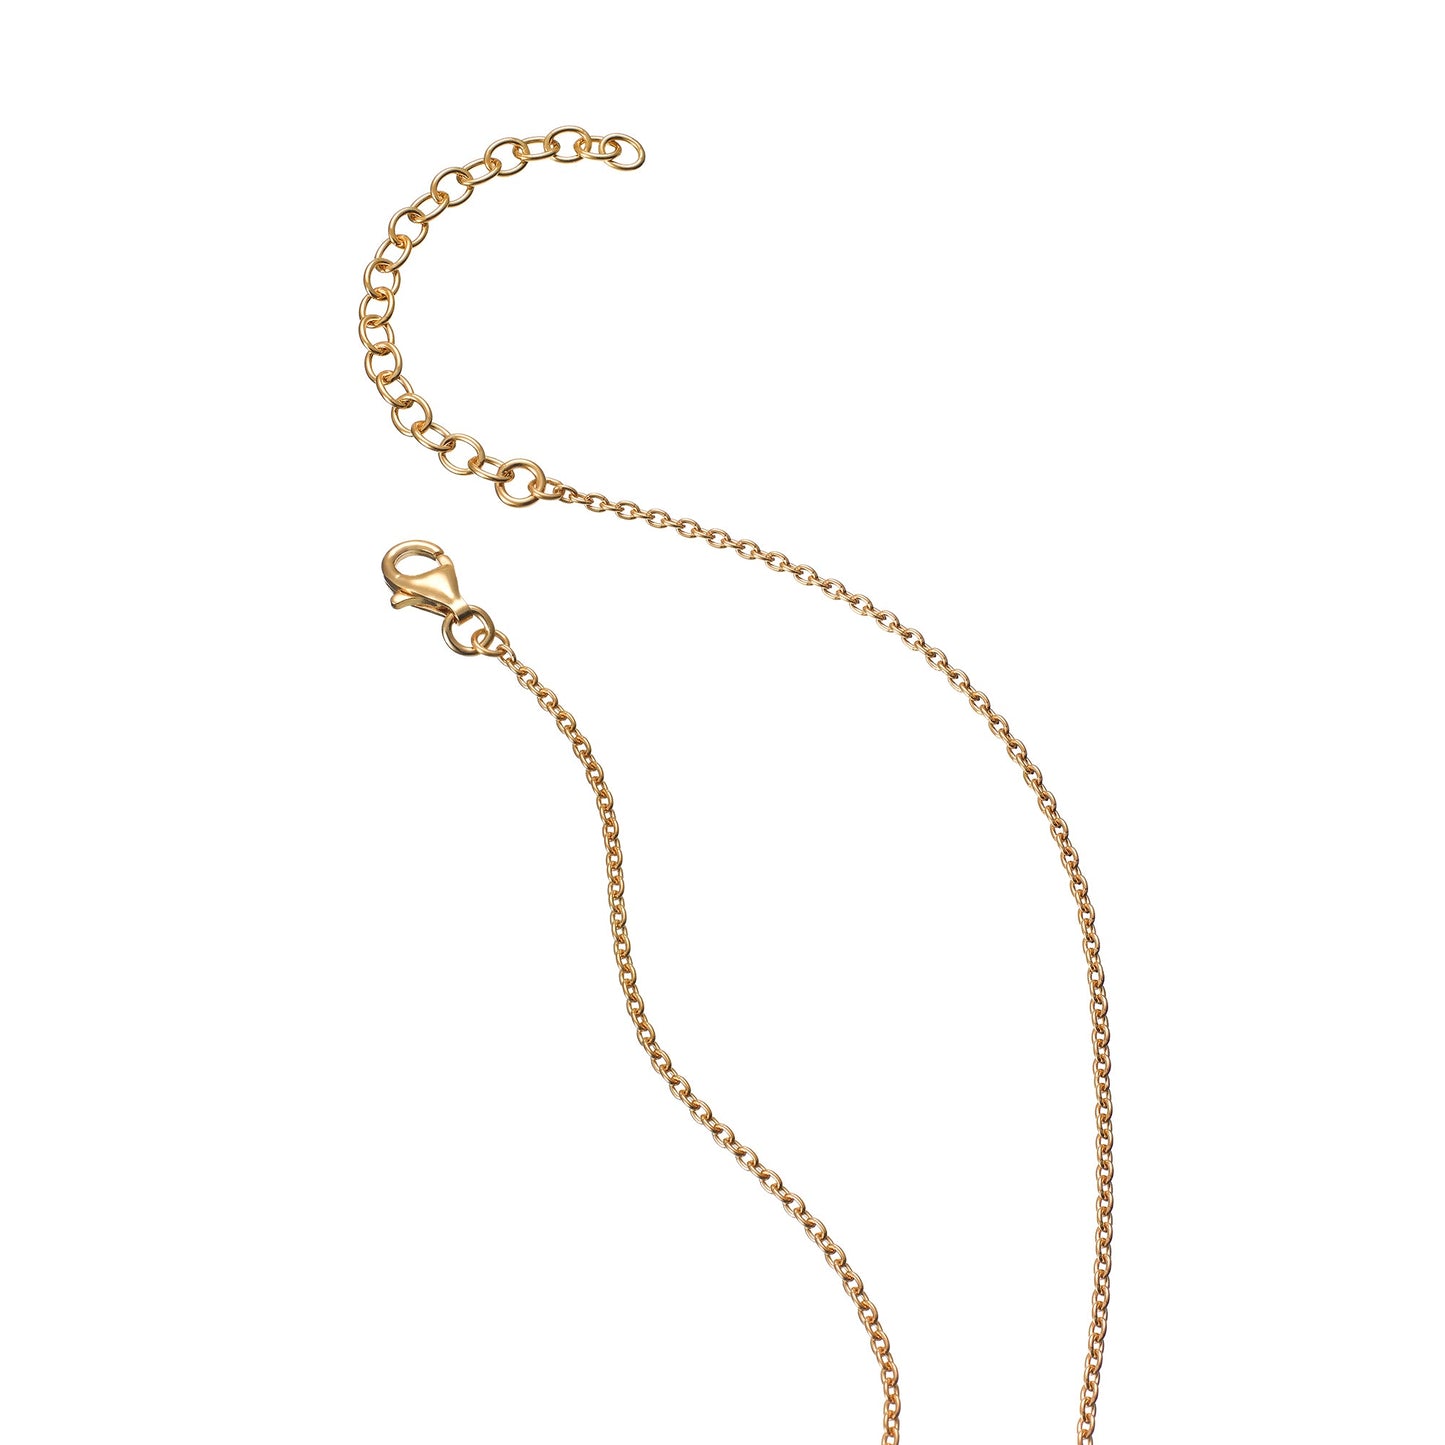 Children’s Gold Extendable Chain Necklace with clasp closure